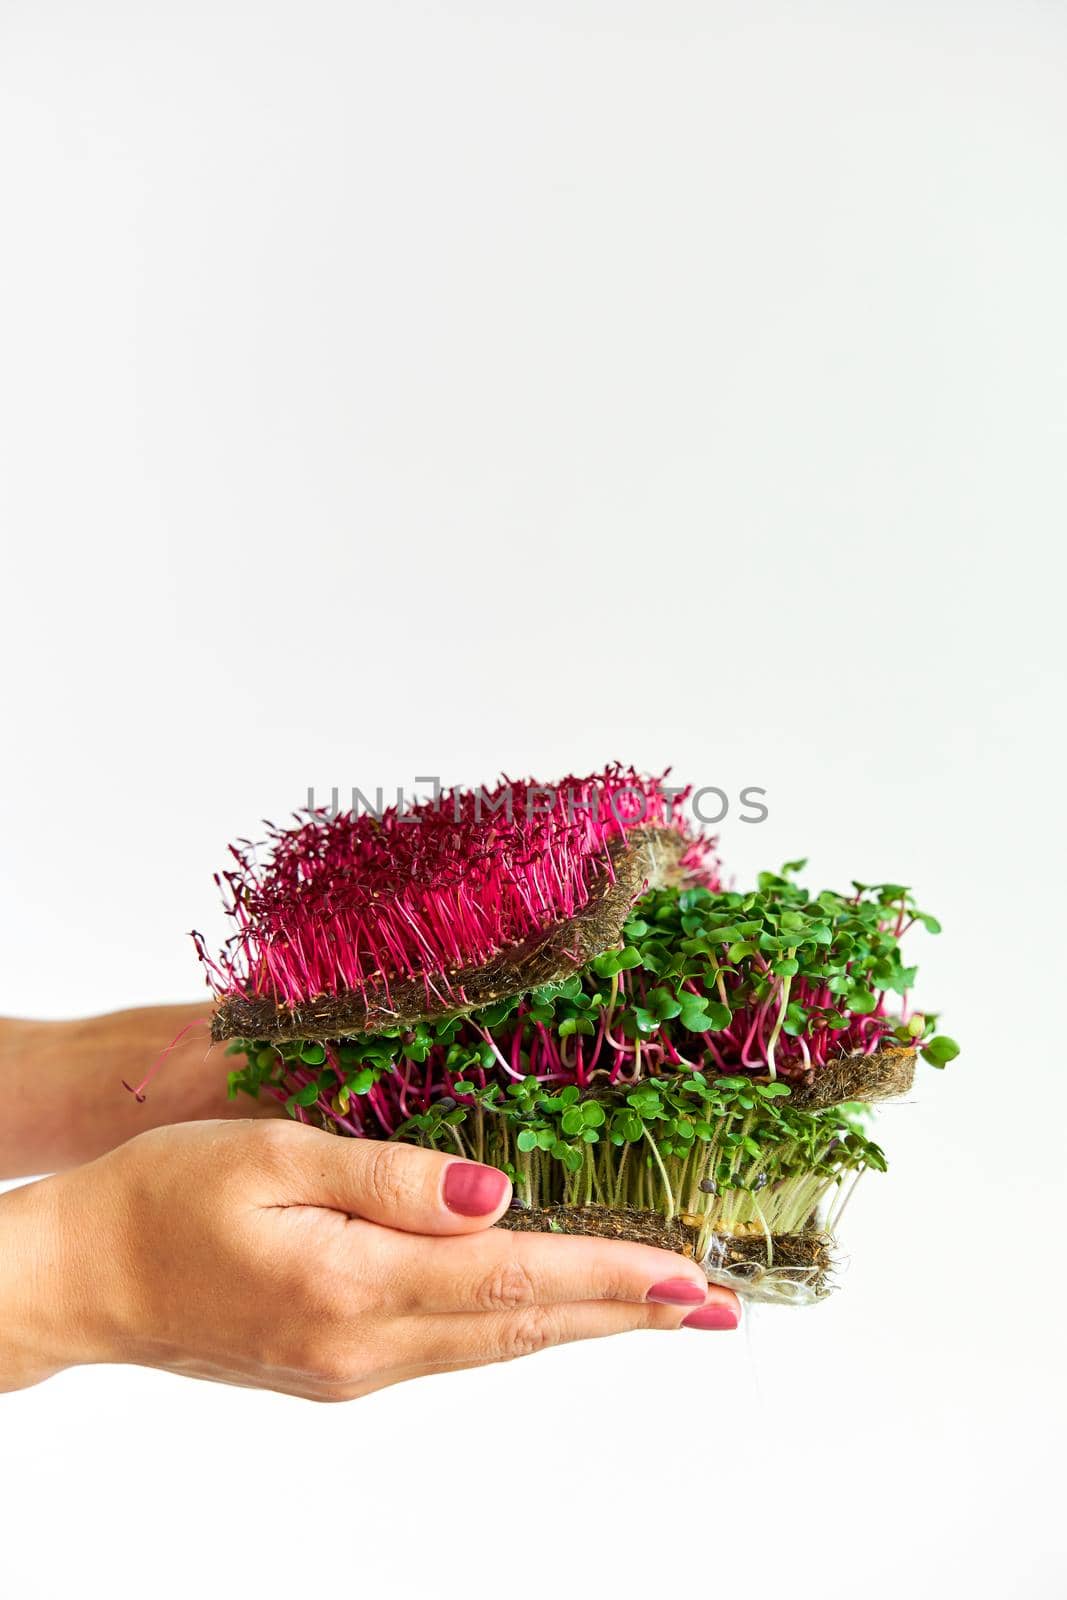 Microgreen plants mix of various plants. Person holding in hand. Growing microgreen mustard, amaranth, radish seeds. Dense greenery growed on fabric.